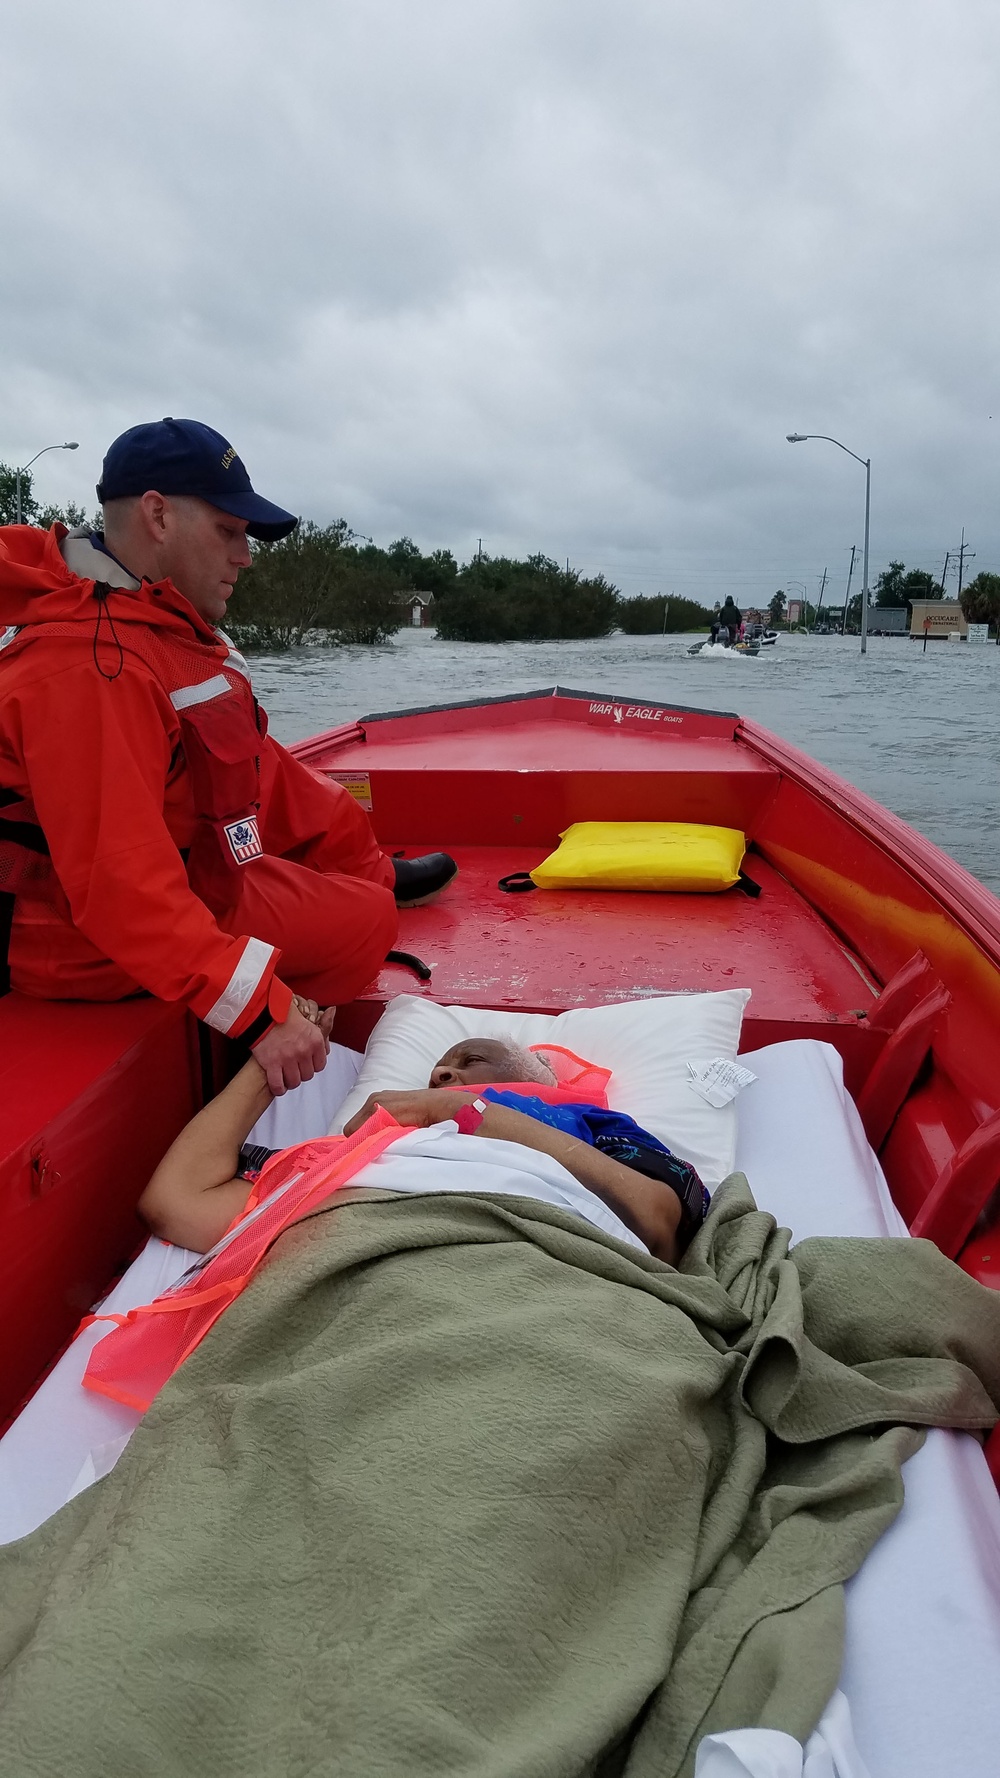 Coast Guard conducts search and rescue in support of Hurricane Harvey